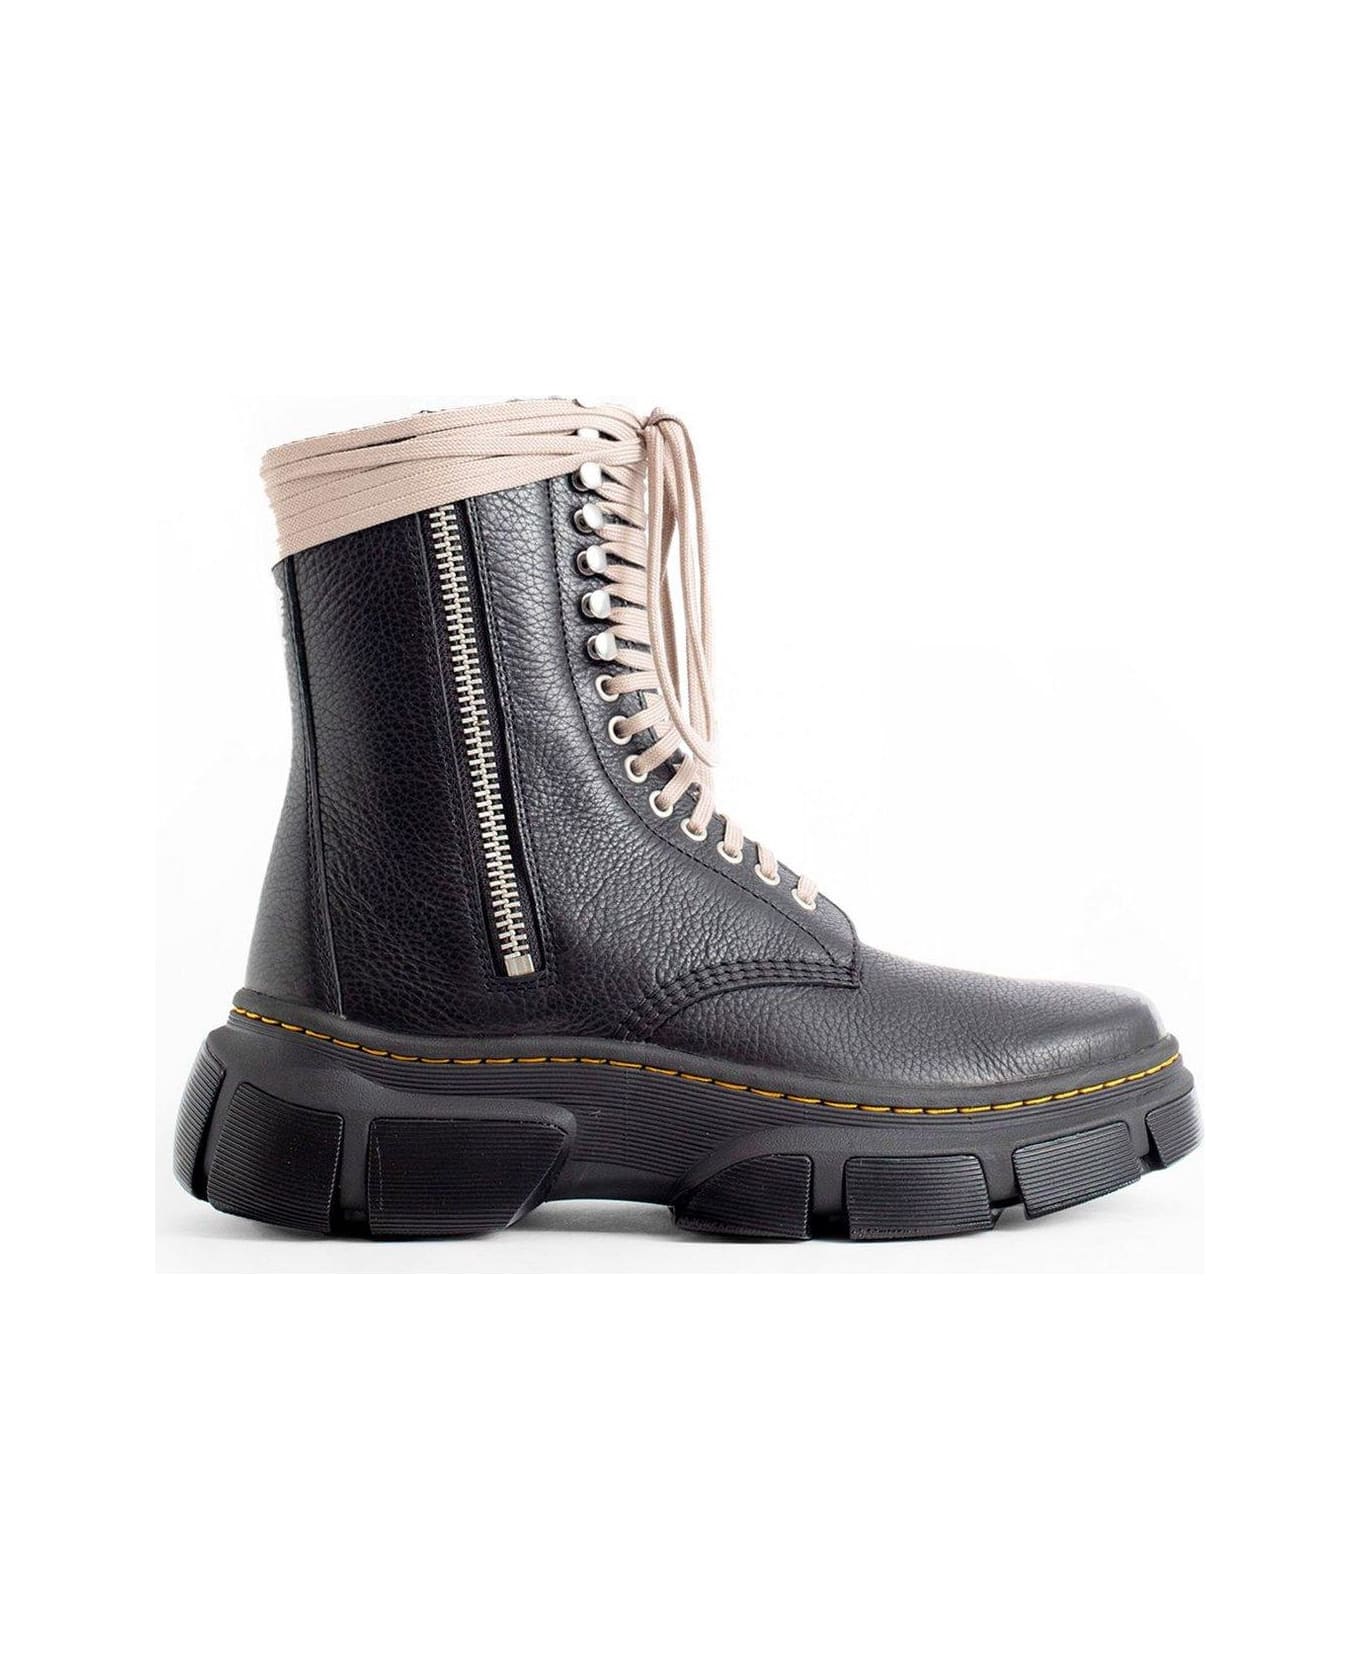 Rick Owens x Dr. Martens Chunky Sole Lace-up Boots - BLACK 09